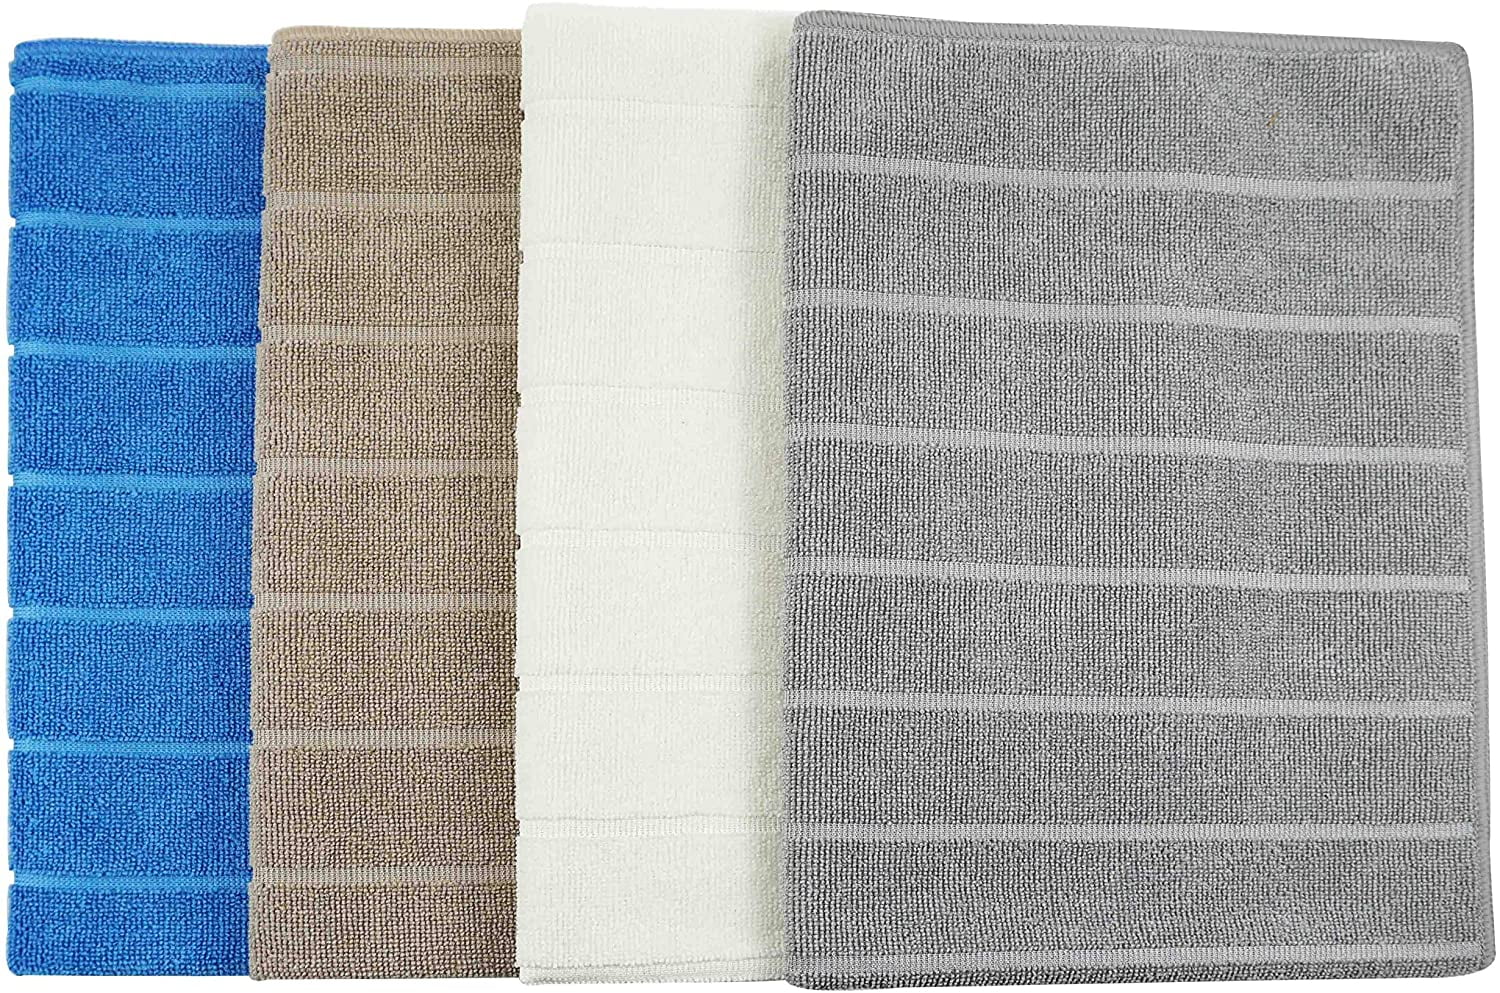 Stripe Designed 28 x 20 Inch Extra Large and Thick Dish Towels Gryeer Microfiber Kitchen Towels Super Absorbent Gray 8 Pack 